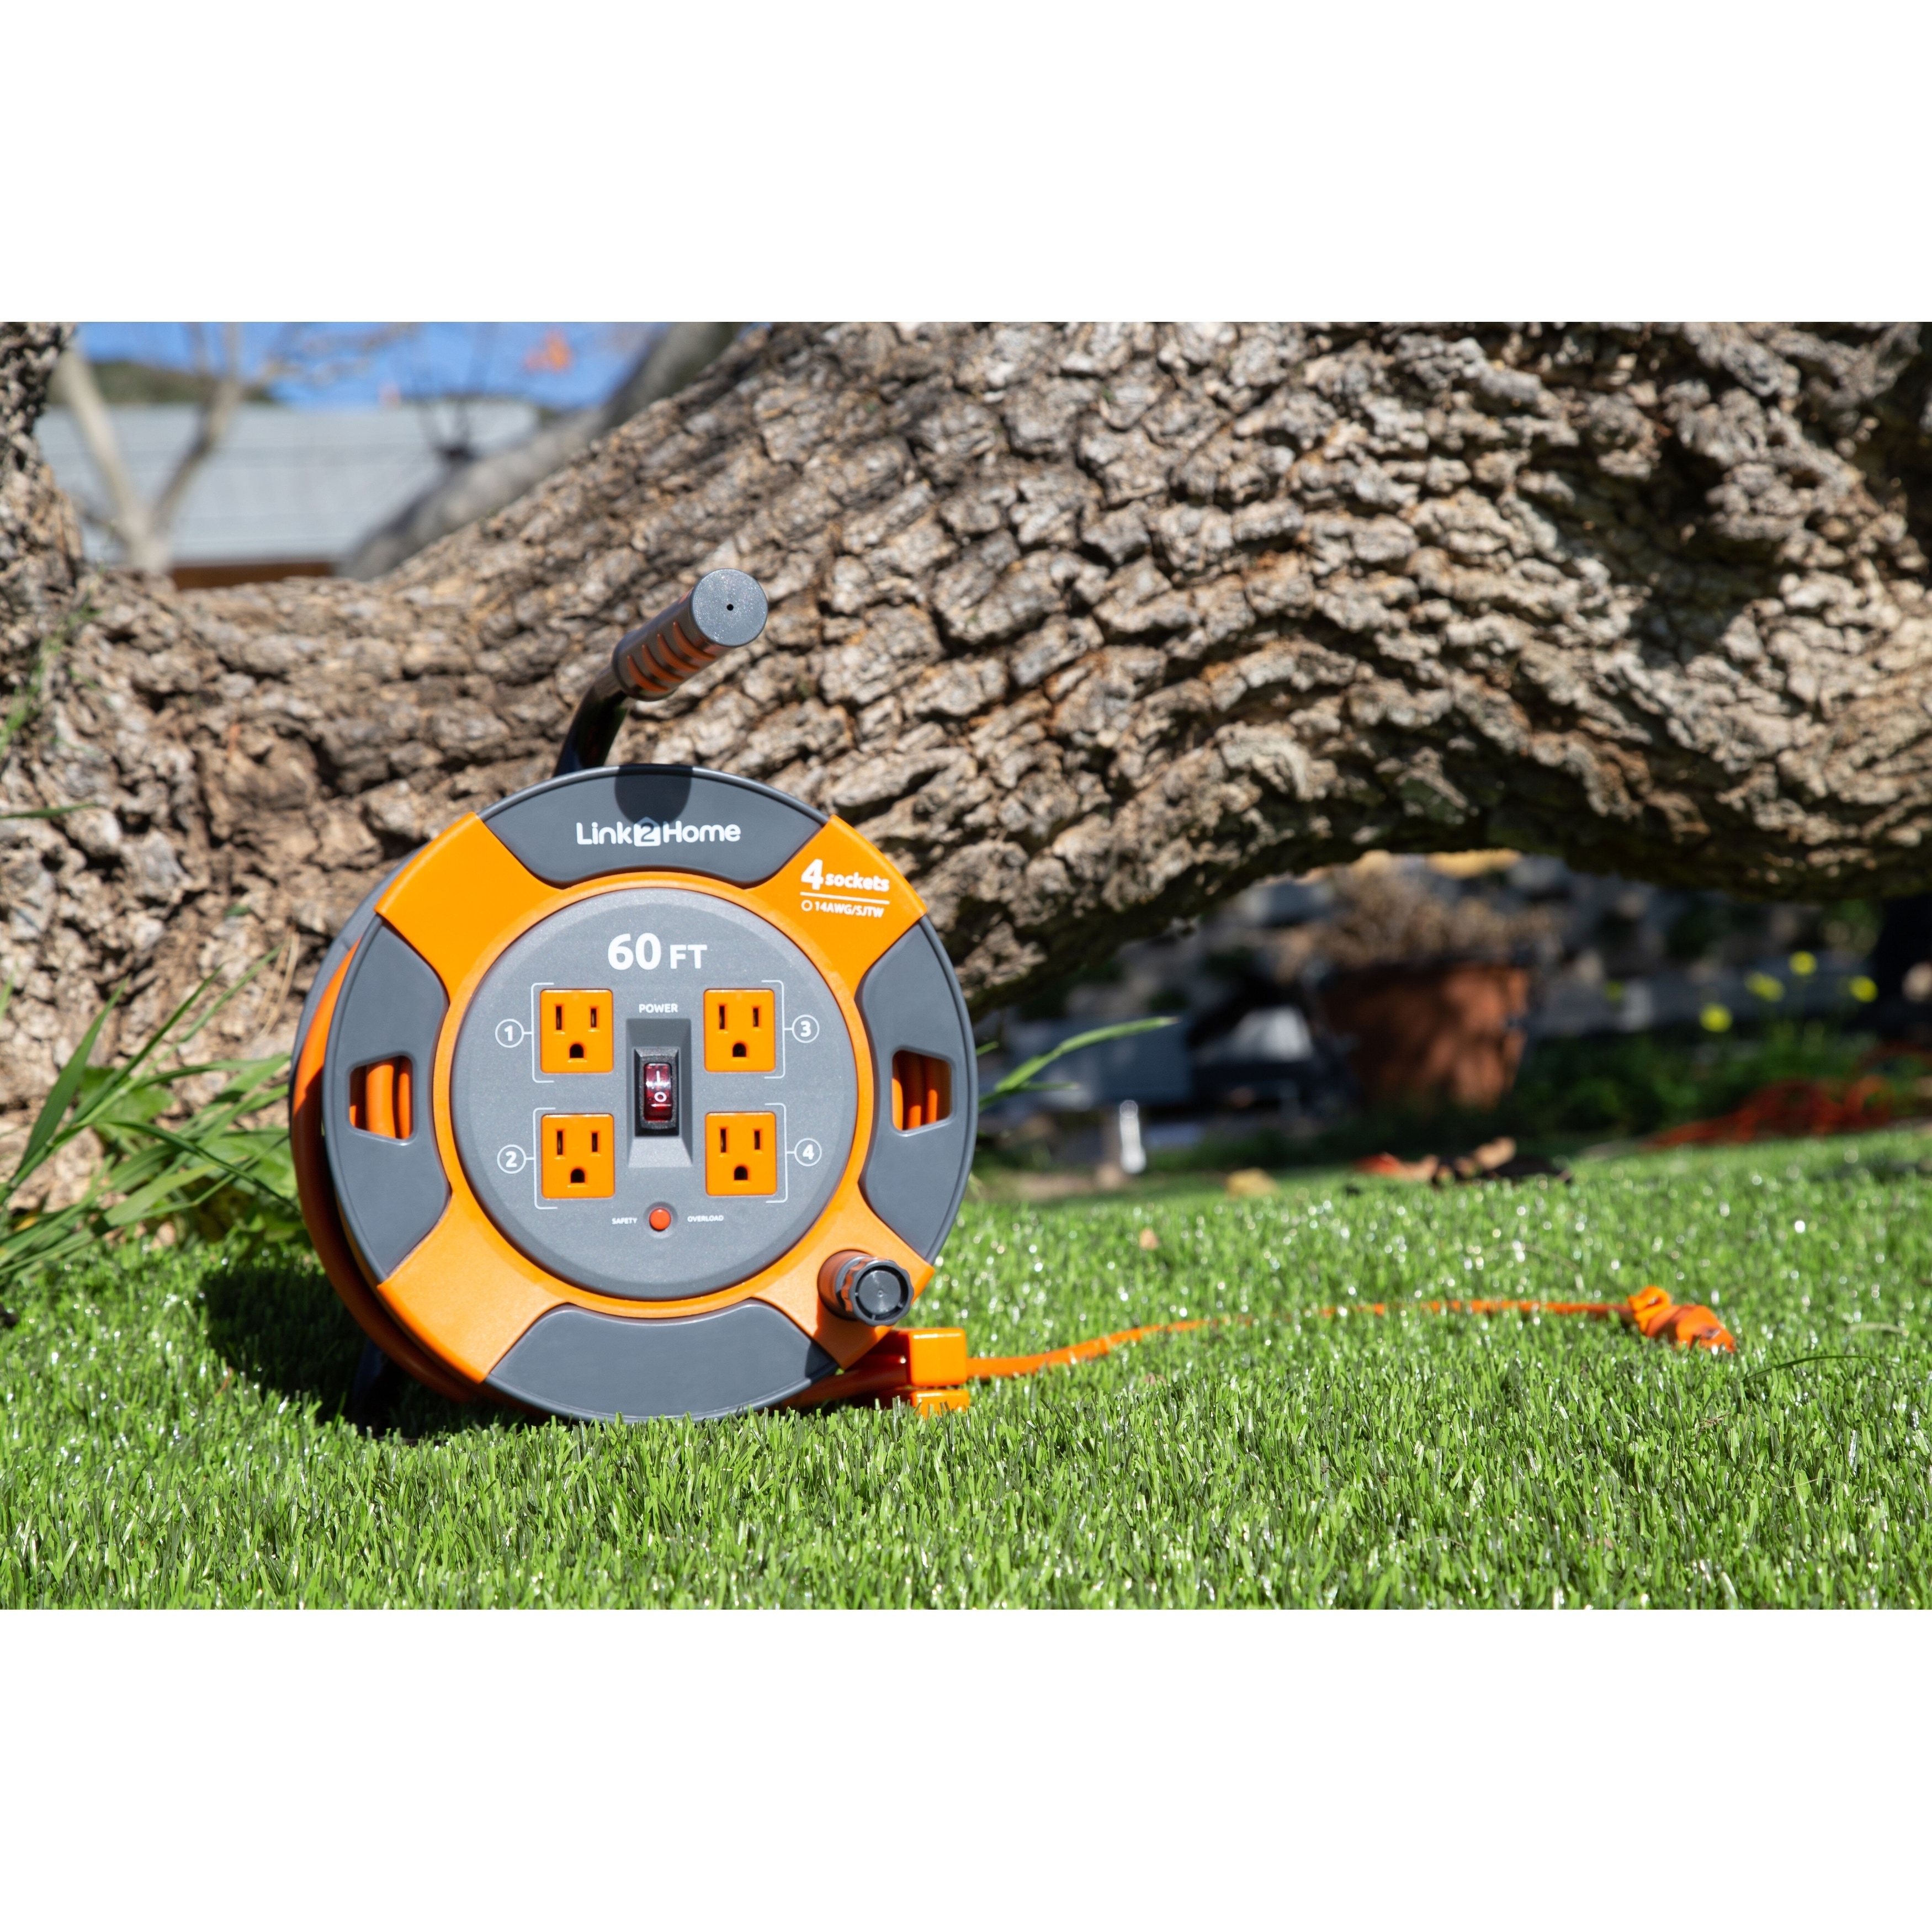 https://ak1.ostkcdn.com/images/products/27889207/Link2Home-Cord-Reel-60-ft.-Extension-Cord-4-Power-Outlets-14-AWG-SJTW-Cable.-Heavy-Duty-High-Visibility-Power-Cord.-81e25ab3-7479-4931-8159-035b4983306c.jpg